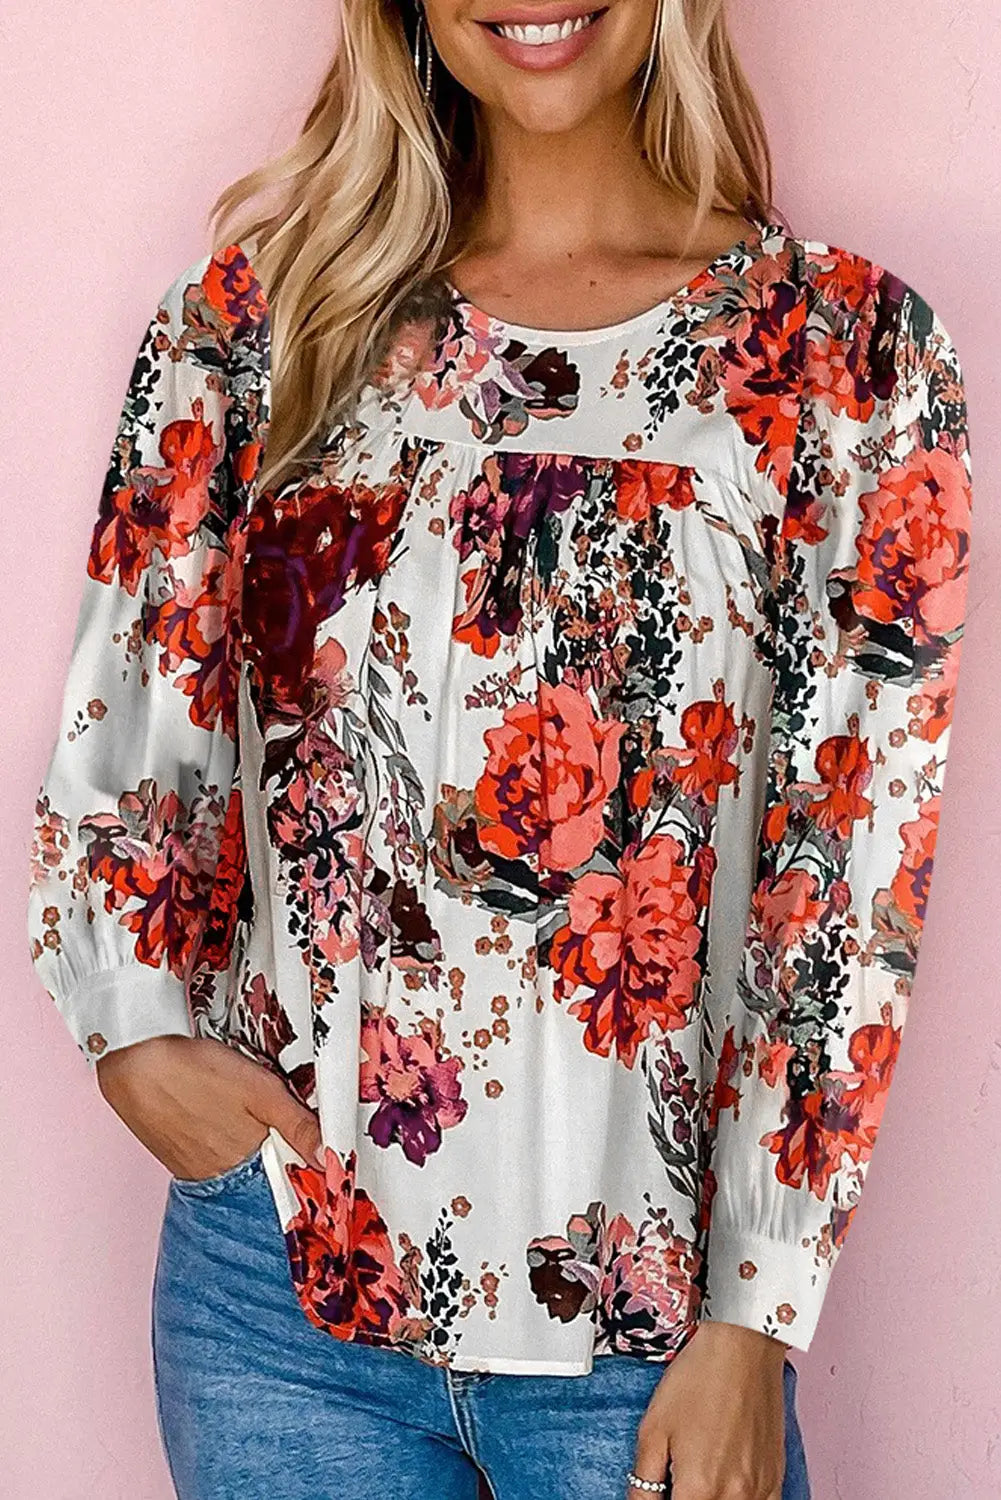 Red floral short sleeve round neck blouse - red1 / s / 95% polyester + 5% elastane - tops